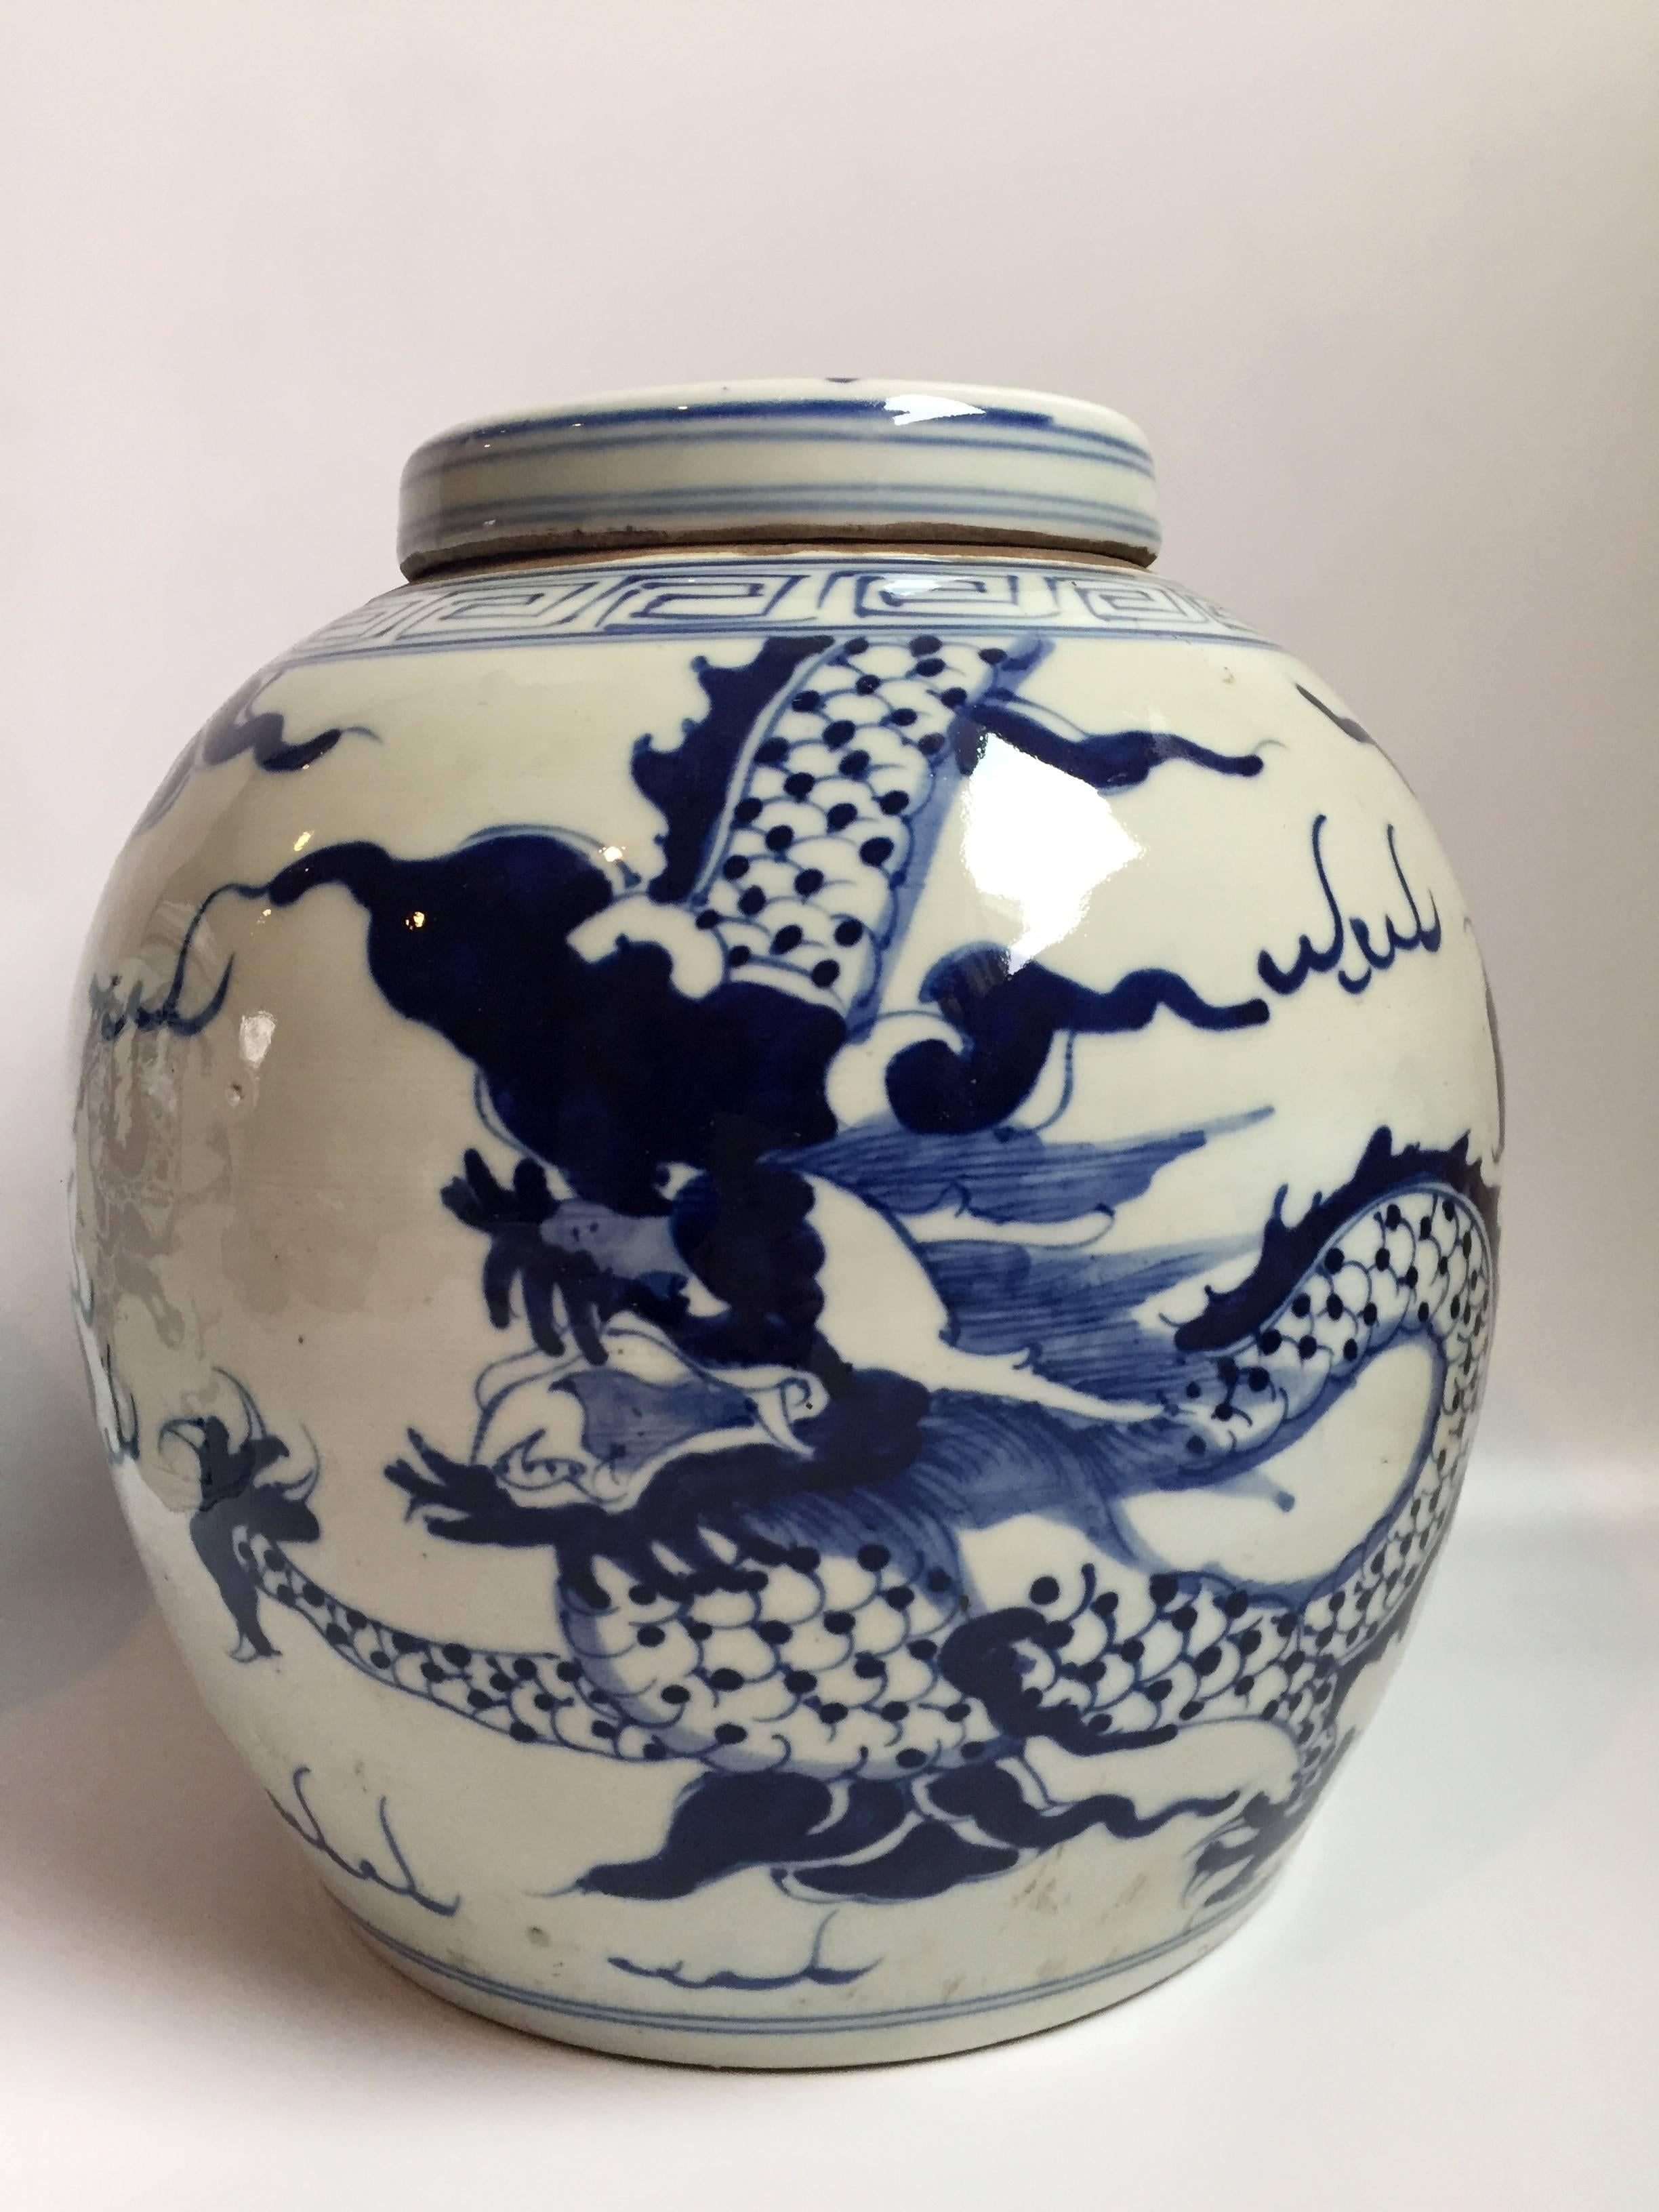 Pair of blue and white ginger jar, 20th Century, Chinese. The image is of a dragon chasing after a fire ball. This beloved image symbolizes good fortune and success. The blue and white is a classic color that is timeless. The colors on these pieces